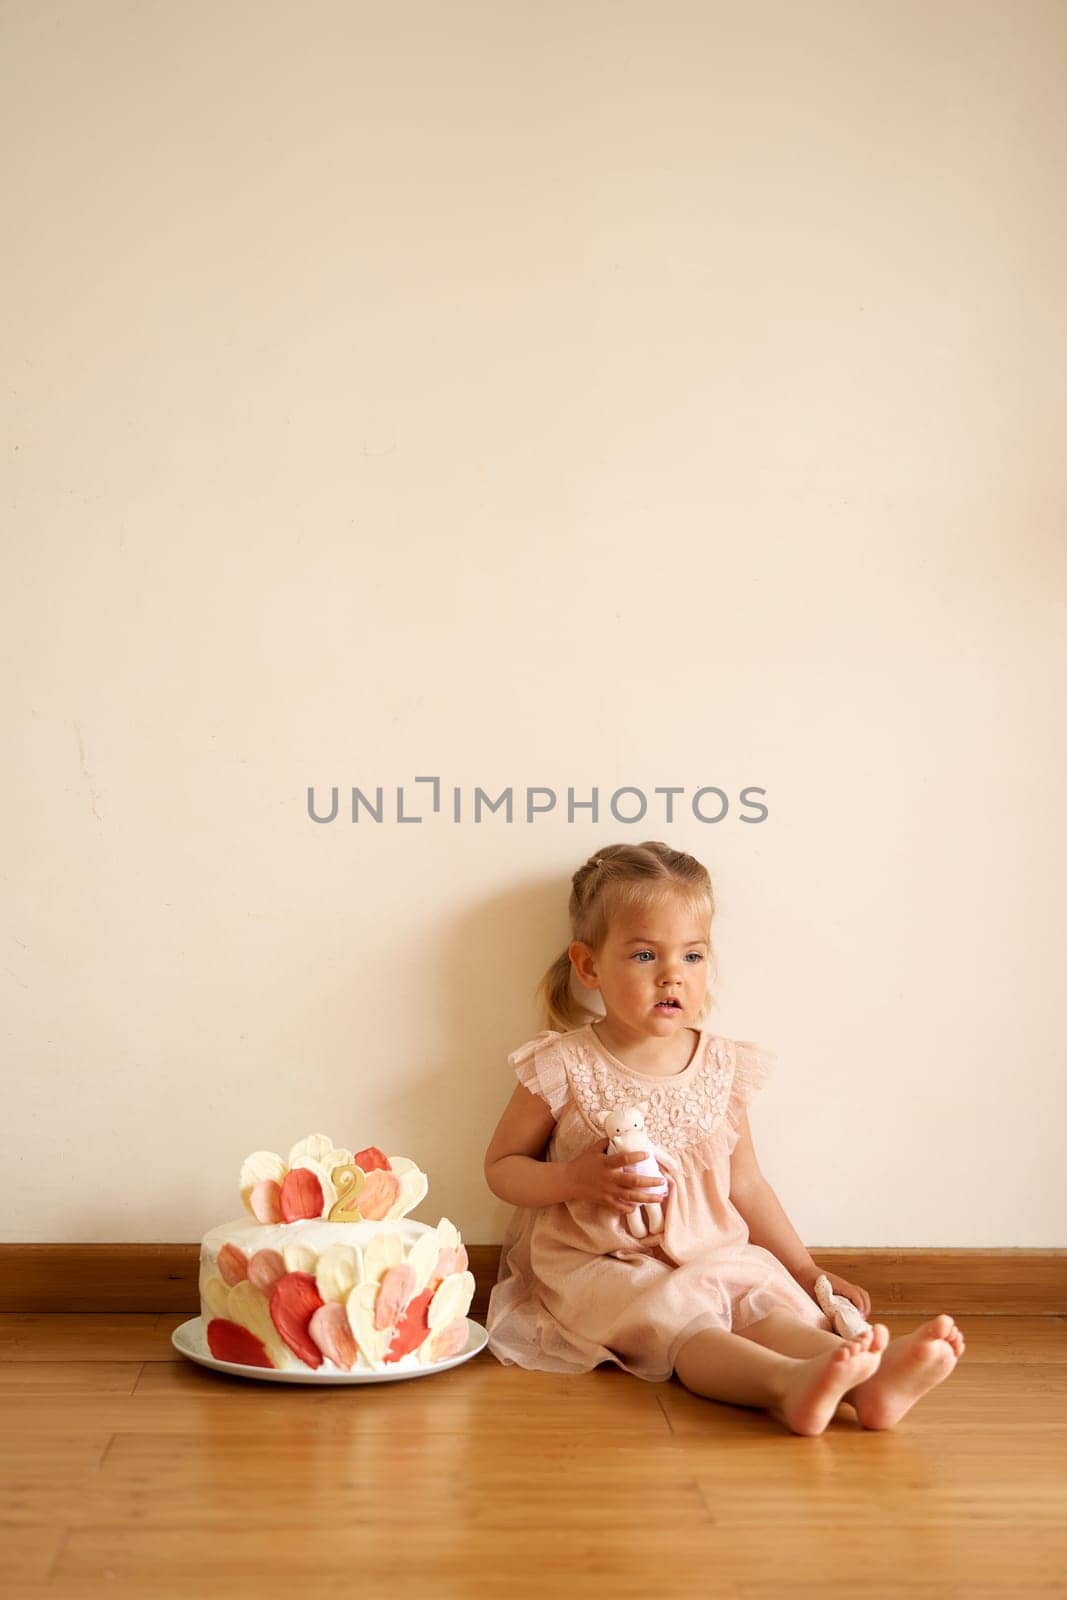 Little girl with a doll in her hand sits on the floor next to a birthday cake on a plate by Nadtochiy